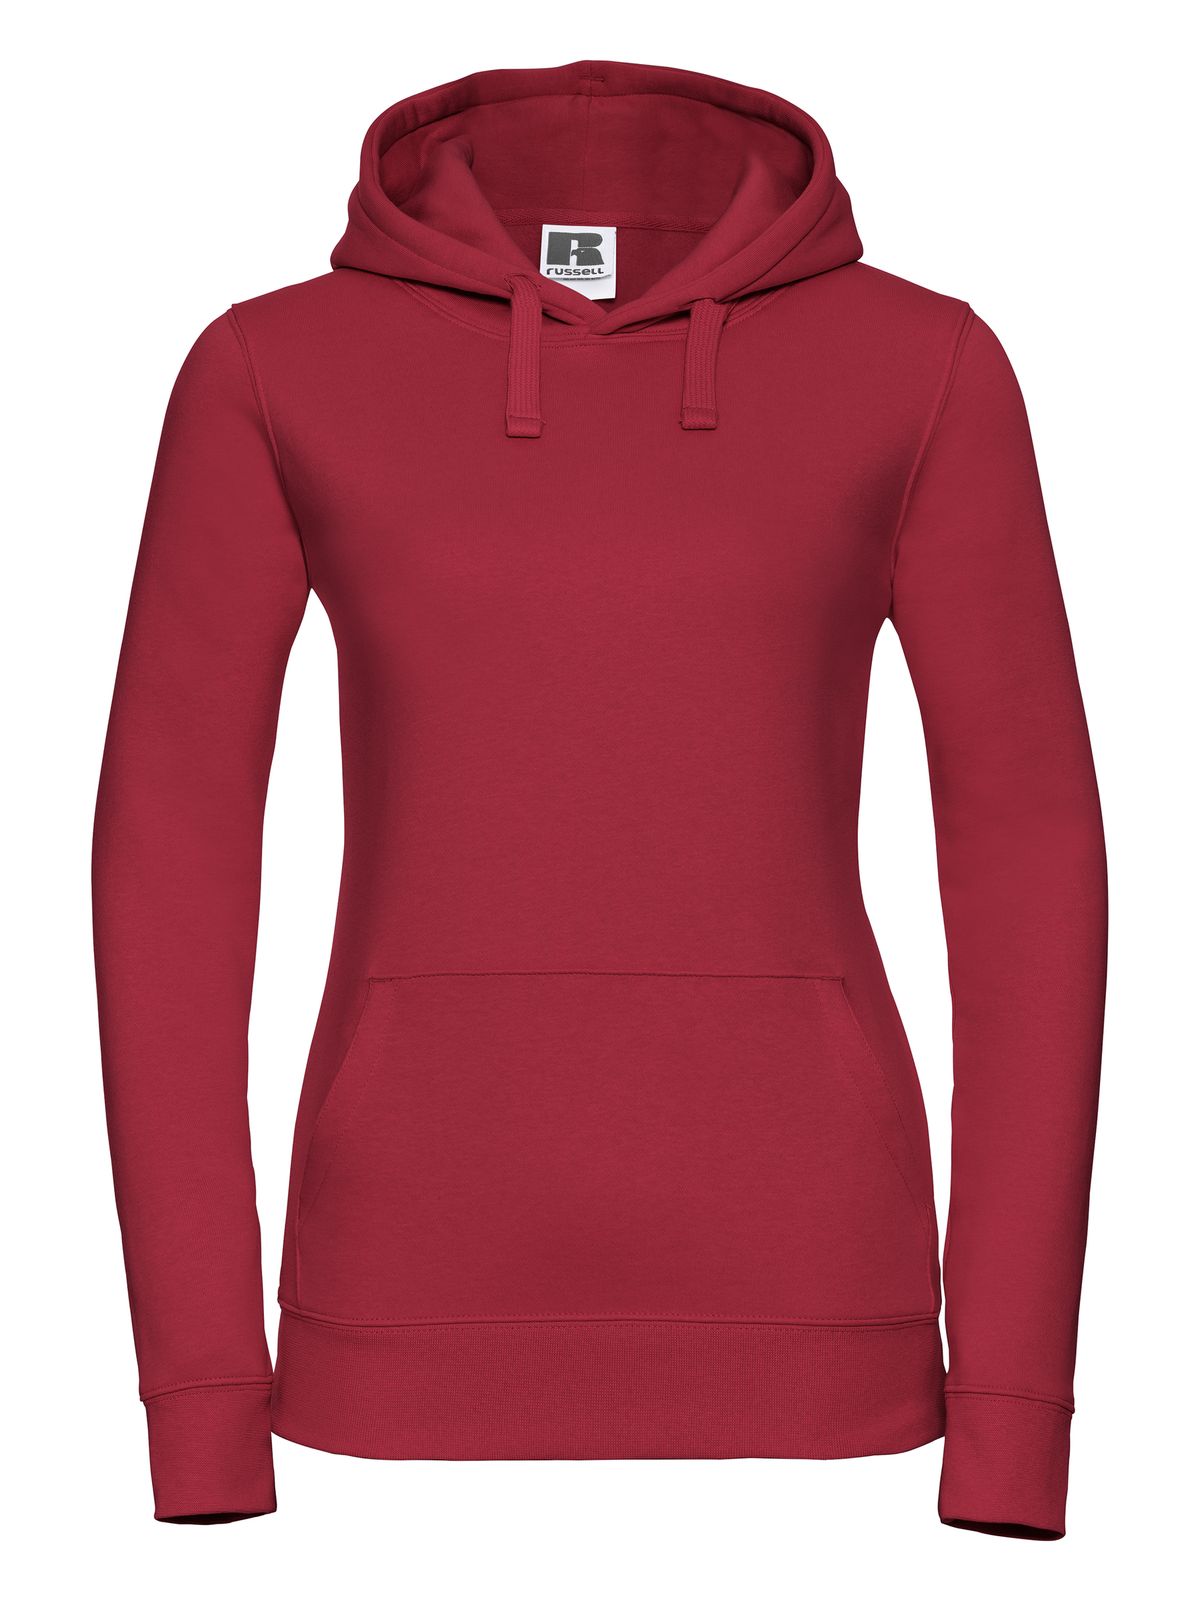 ladies-authentic-hooded-sweat-classic-red.webp